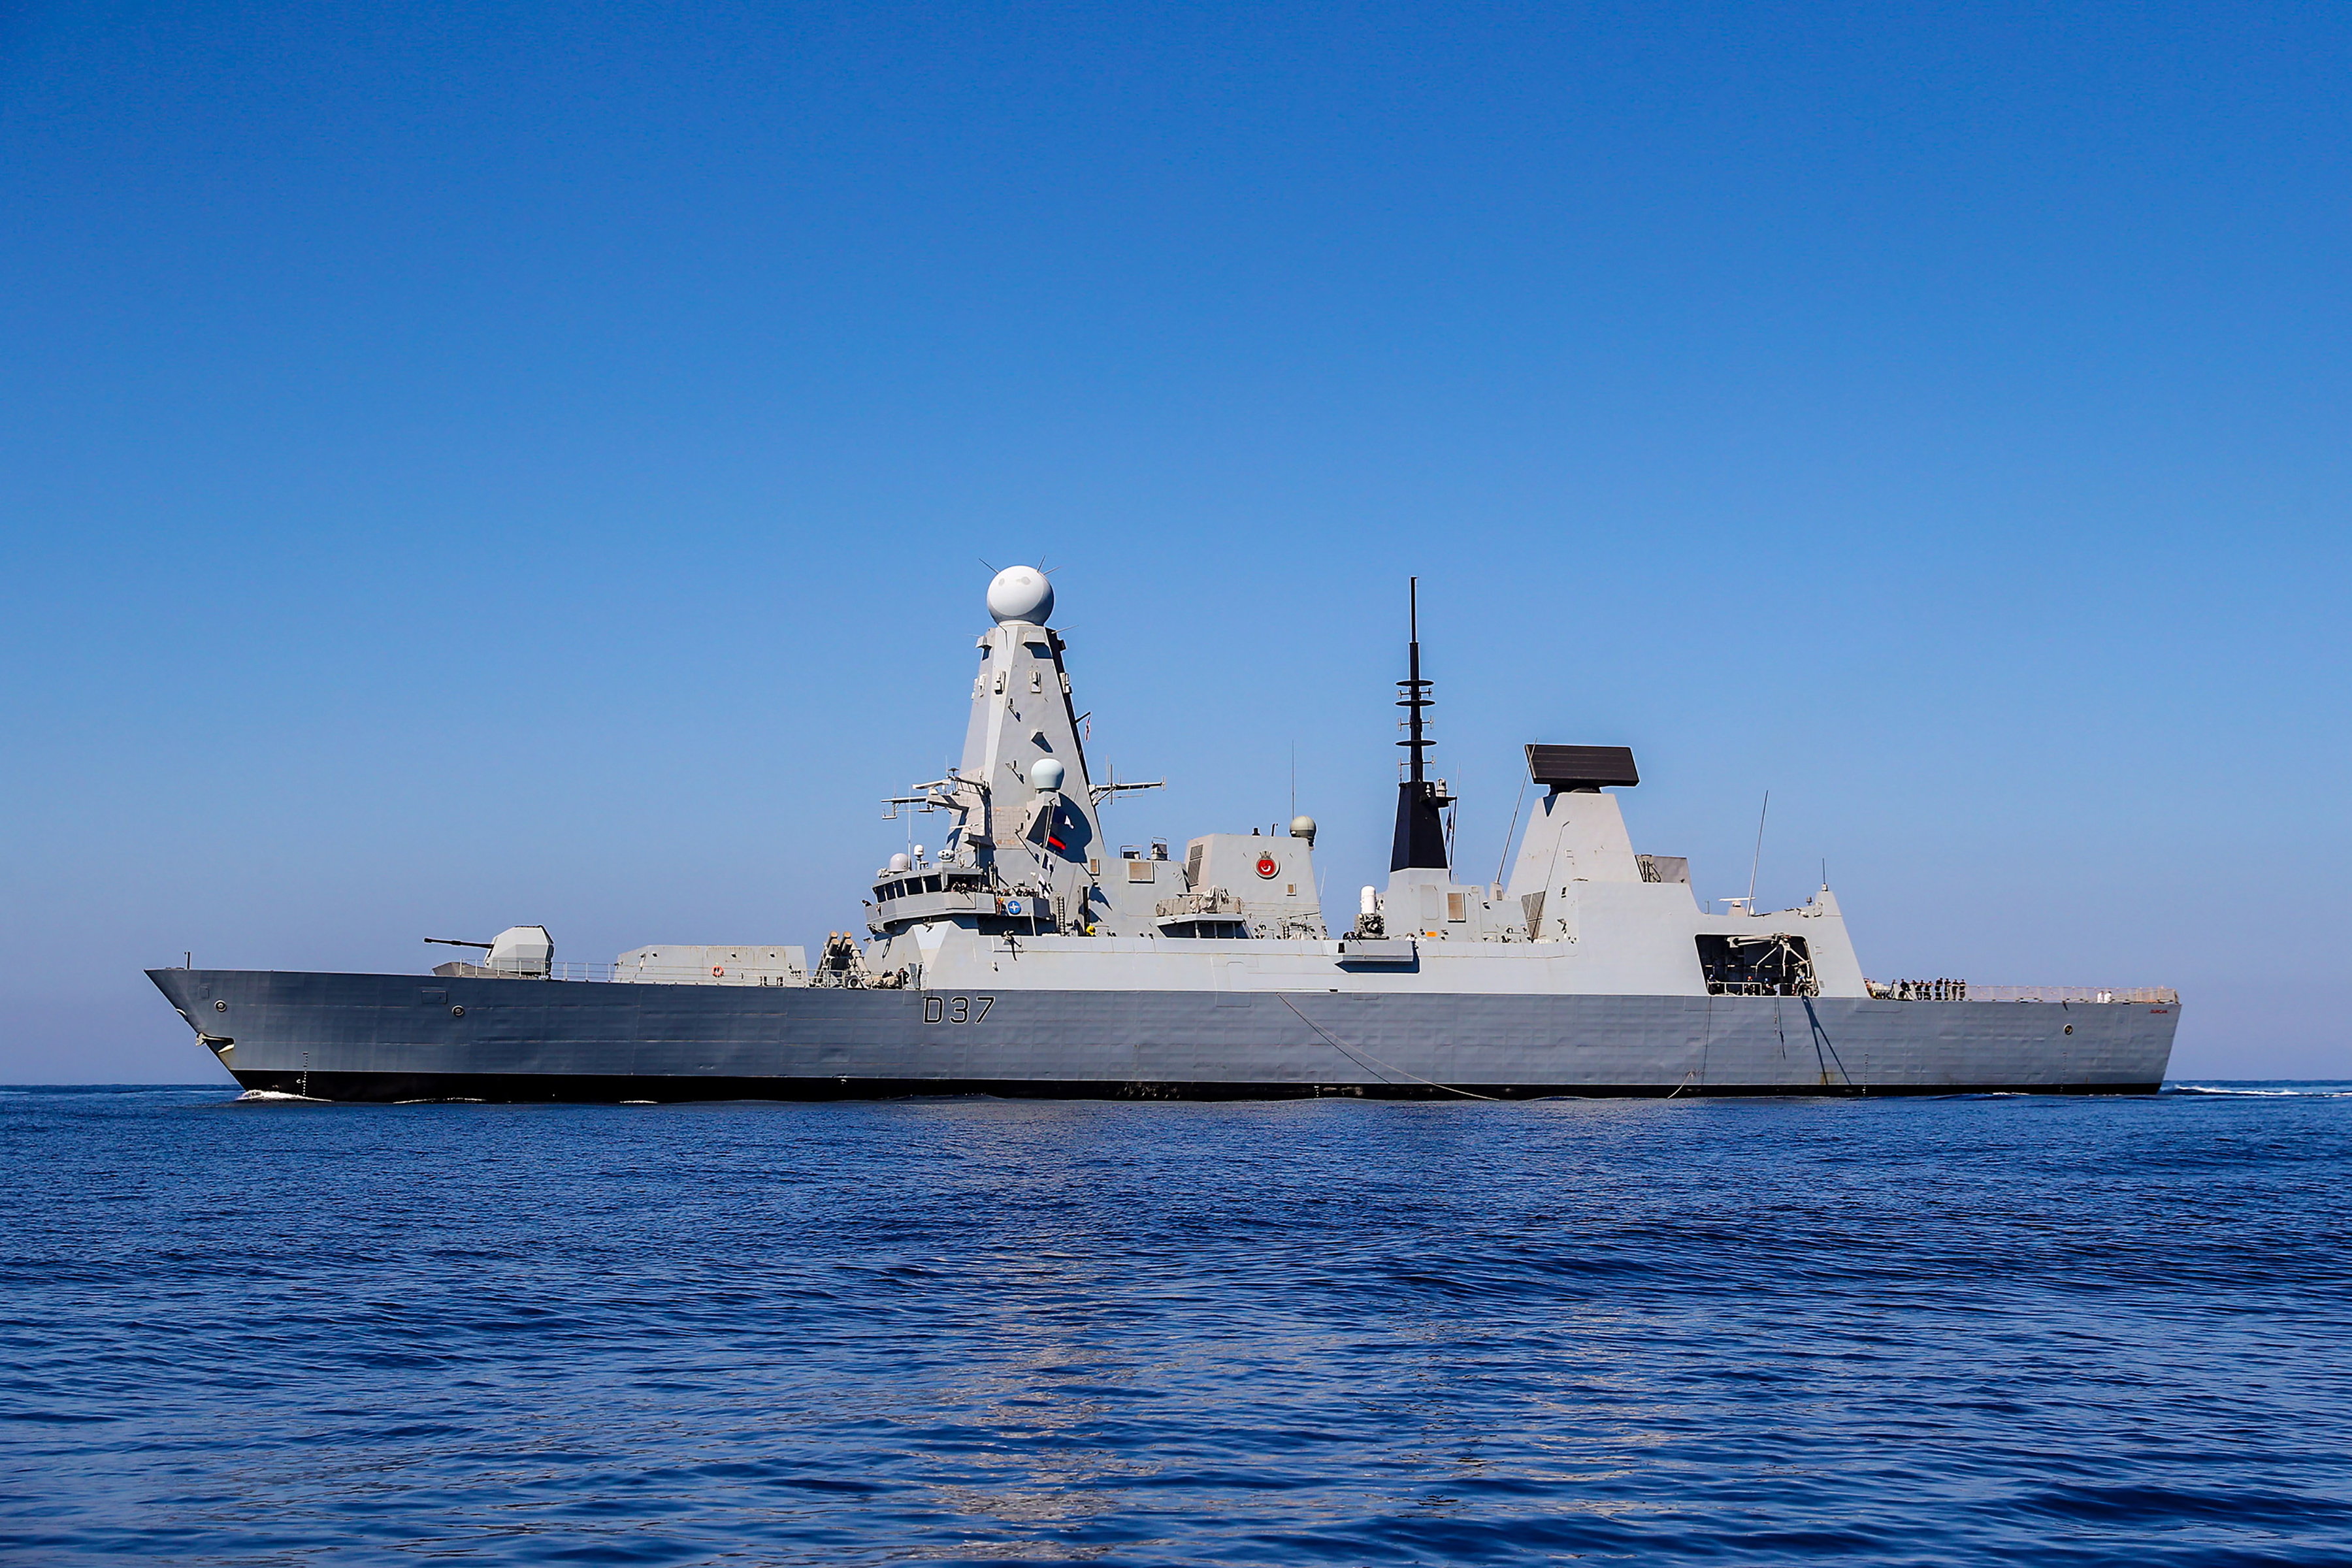  HMS Duncan  arrives in the Gulf Royal Navy